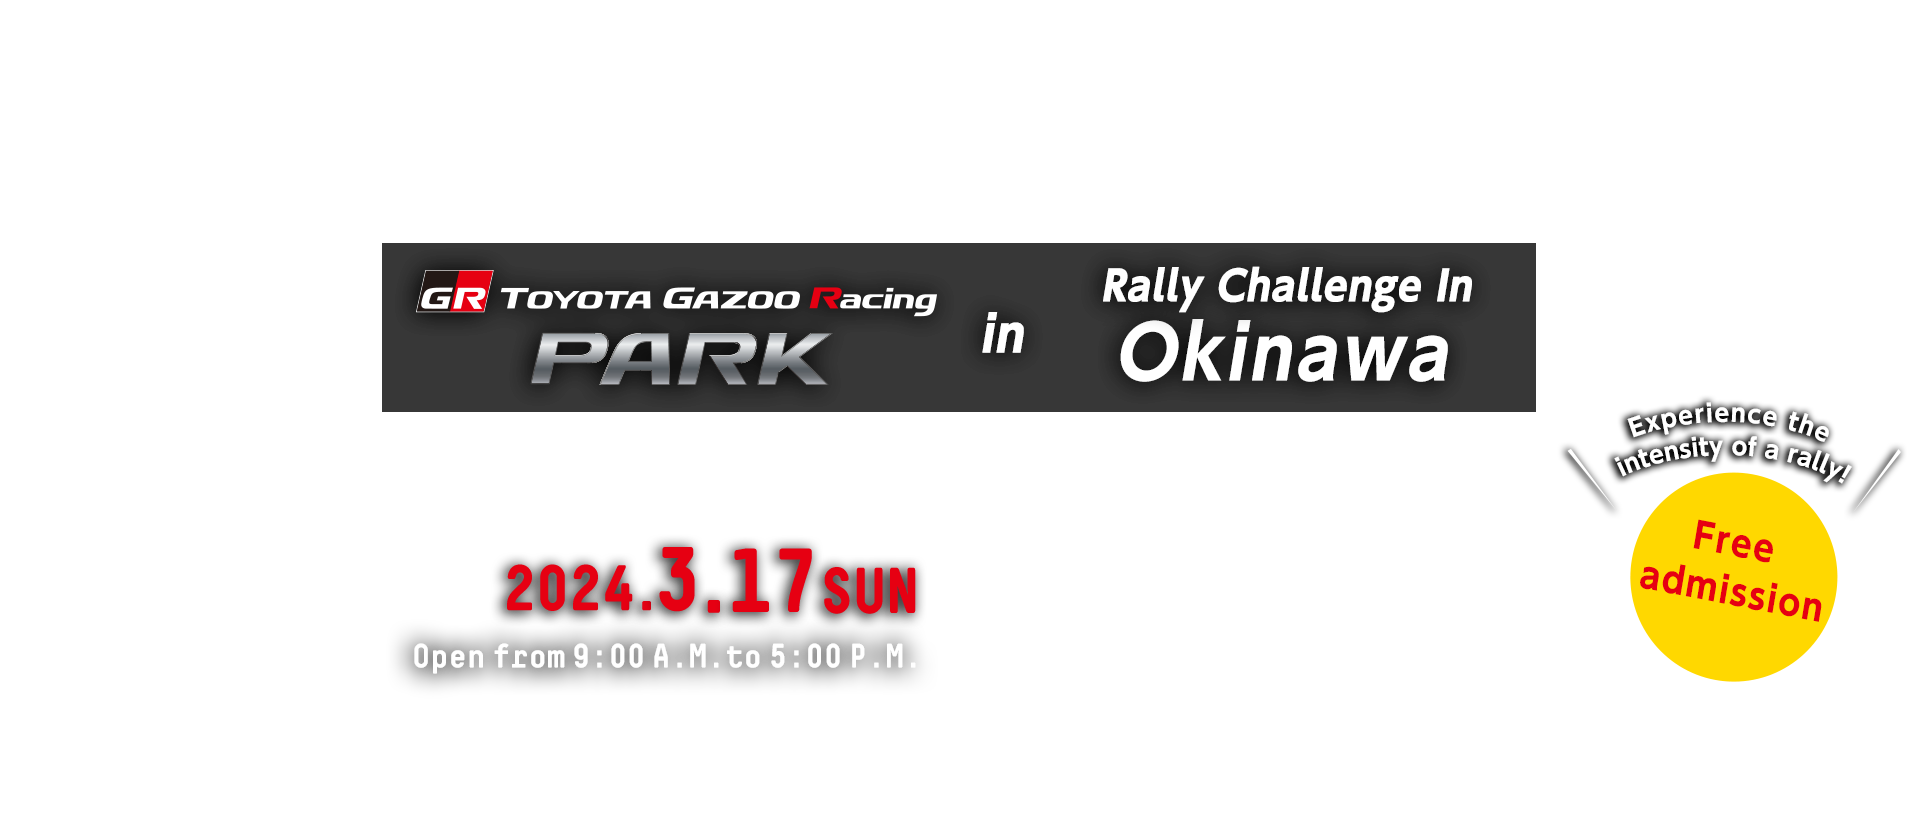 TOYOTA GAZOO Racing PARK in Rally Challenge in Okinawa 日時：Sunday March 17, 2024 Open from 9:00 A.M. to 5:00 P.M.　Free admission Venue: Koza Sports Park